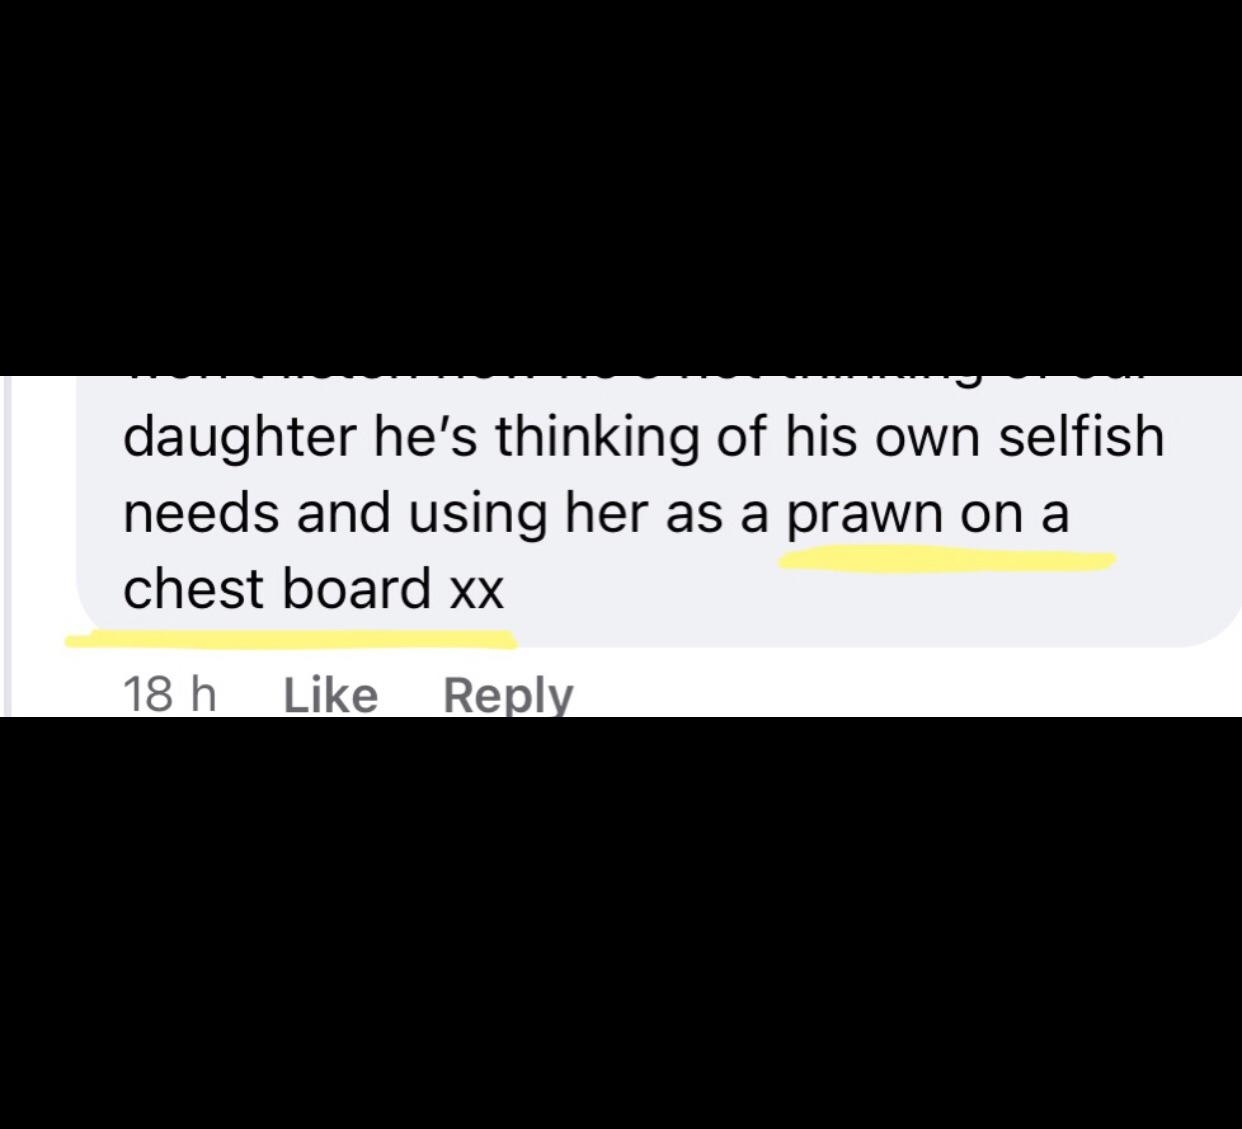 &quot;he&#x27;s thinking of his own selfish needs and using her as a prawn on a chest board xx&quot;